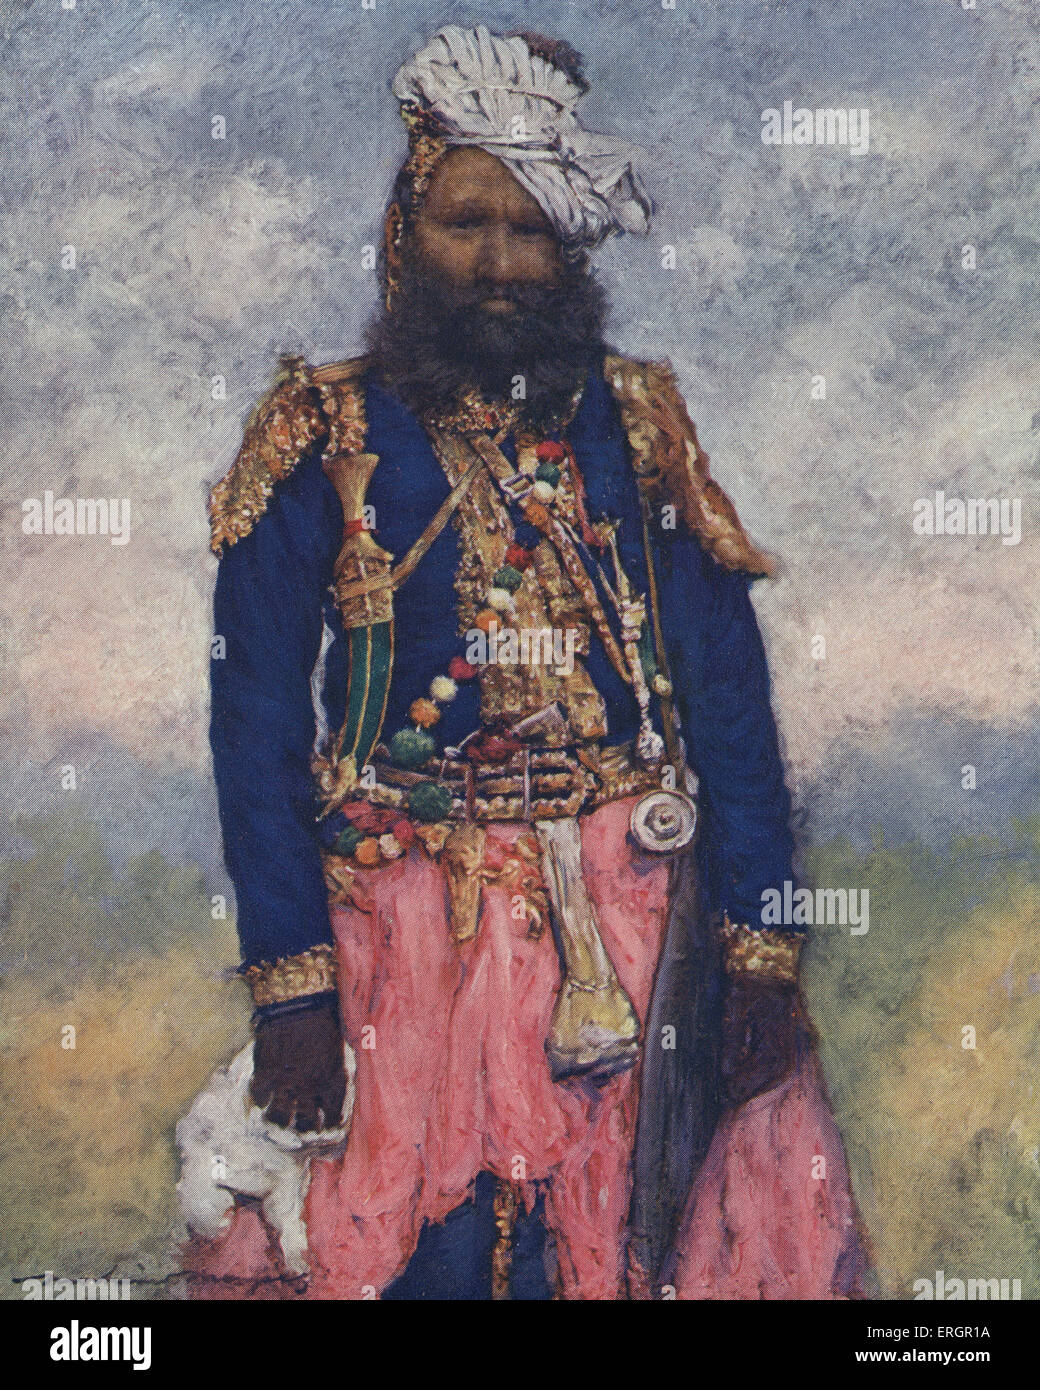 'Retainer', a soldier from  Rajgarh, a princely state in India during the British Raj.  After the illustration by Mortimer Stock Photo